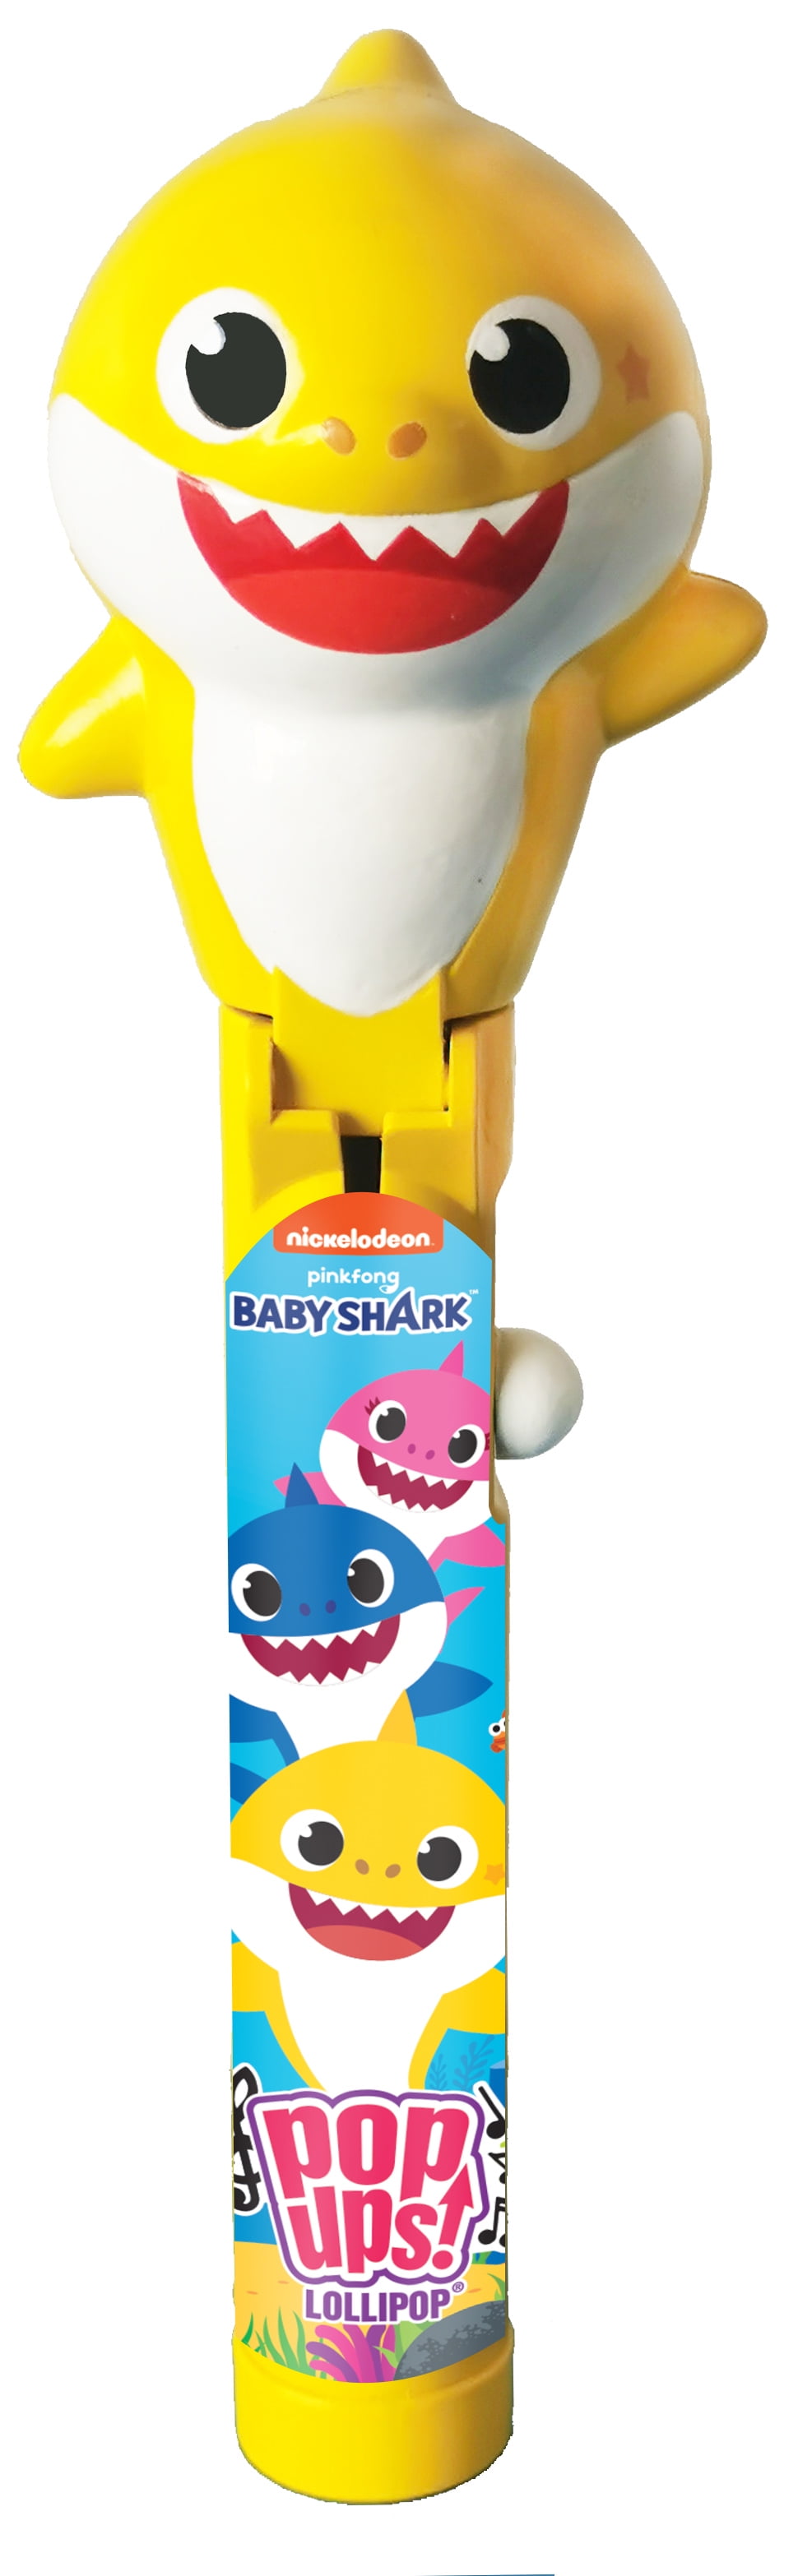 Baby Shark Talking Pop Up comes with a JUMBO lollipop, push the button,  open the character head and listen to everybody's favorite Baby shark Song!  